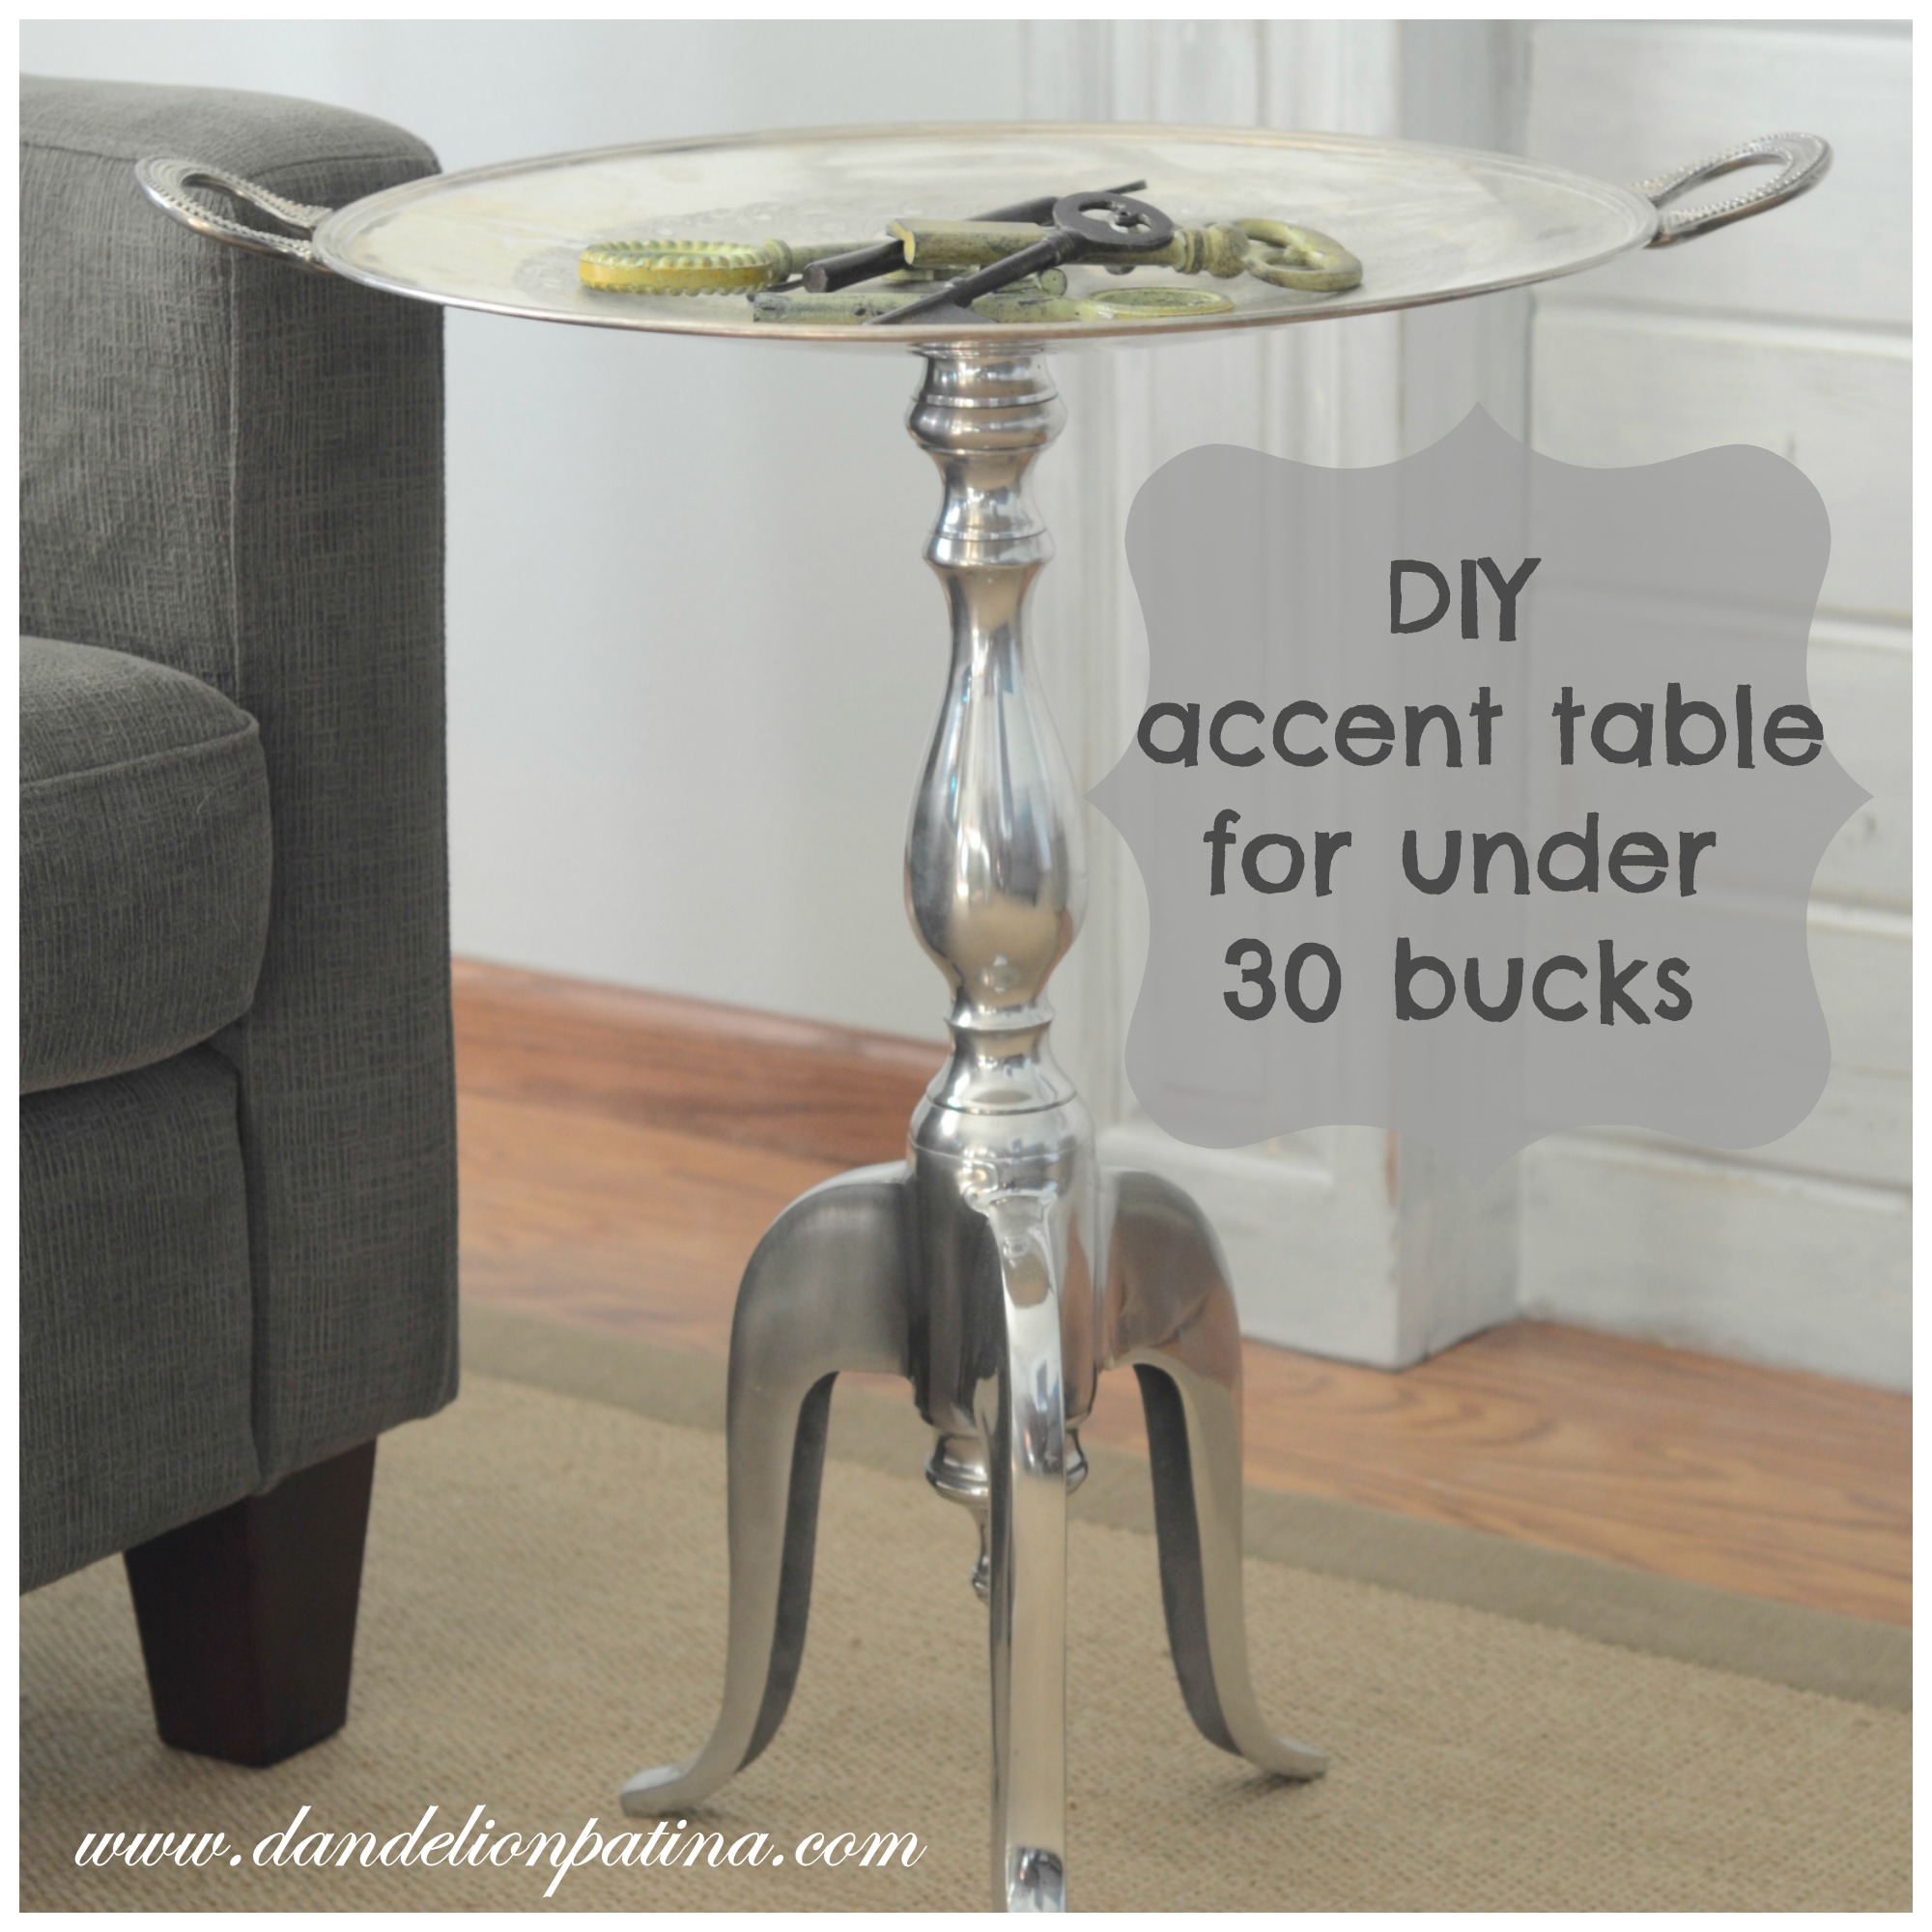 design metal accent table with small decor diy dandelion patina avenue six piece chair and set mirrored foyer pool chairs bunnings cherry end tables living room edmonton entryway